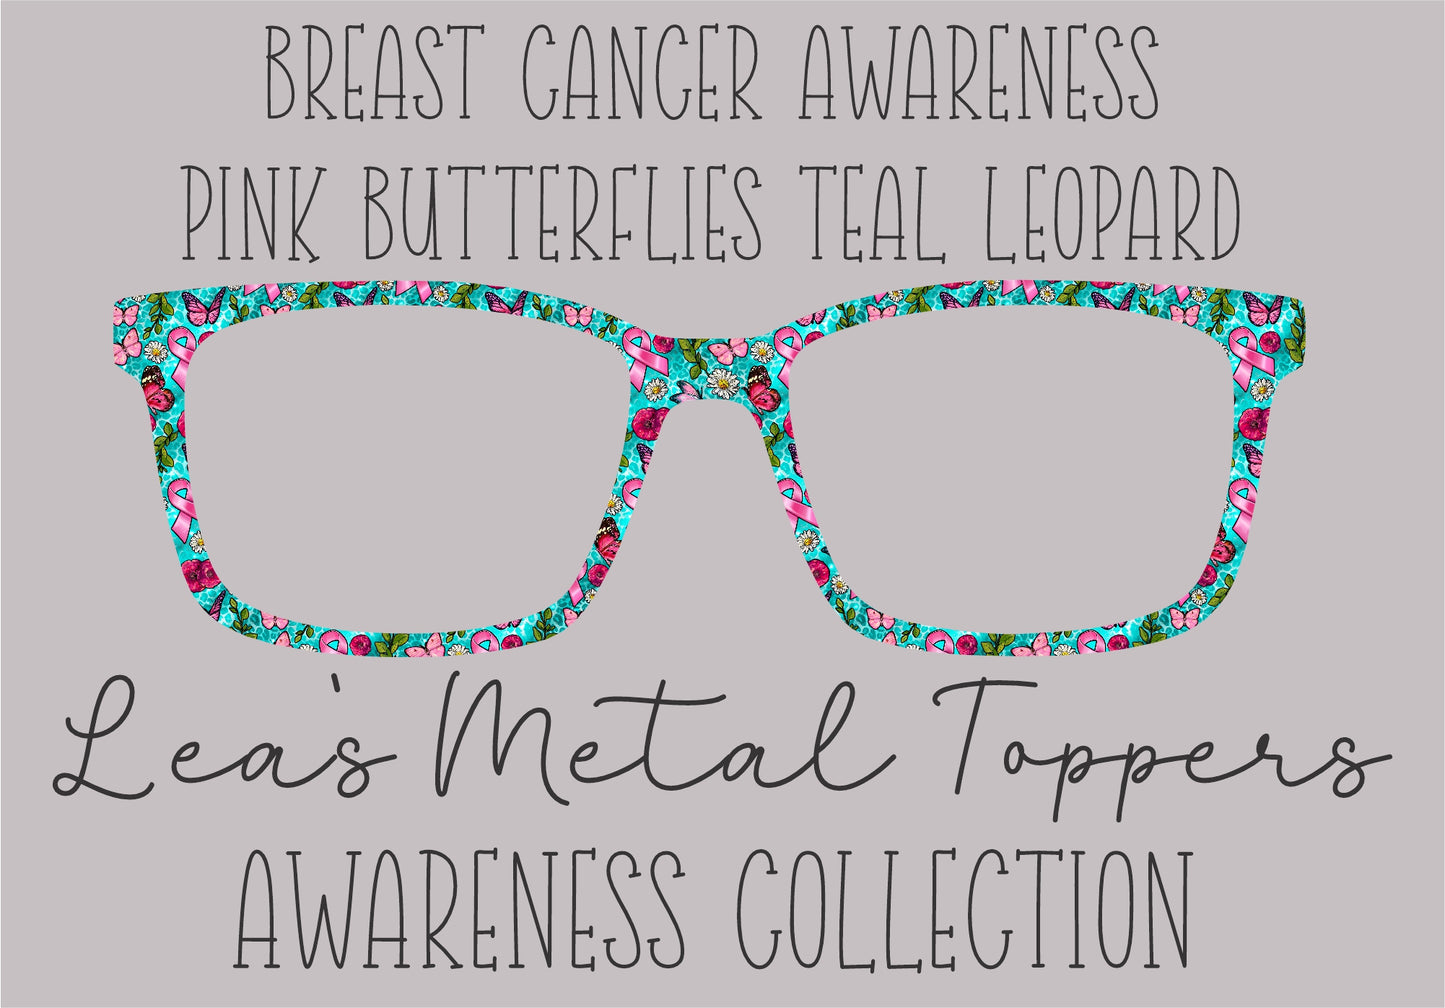 BREAST CANCER AWARENESS PINK BUTTERFLIES TEAL LEOPARD Eyewear Frame Toppers COMES WITH MAGNETS